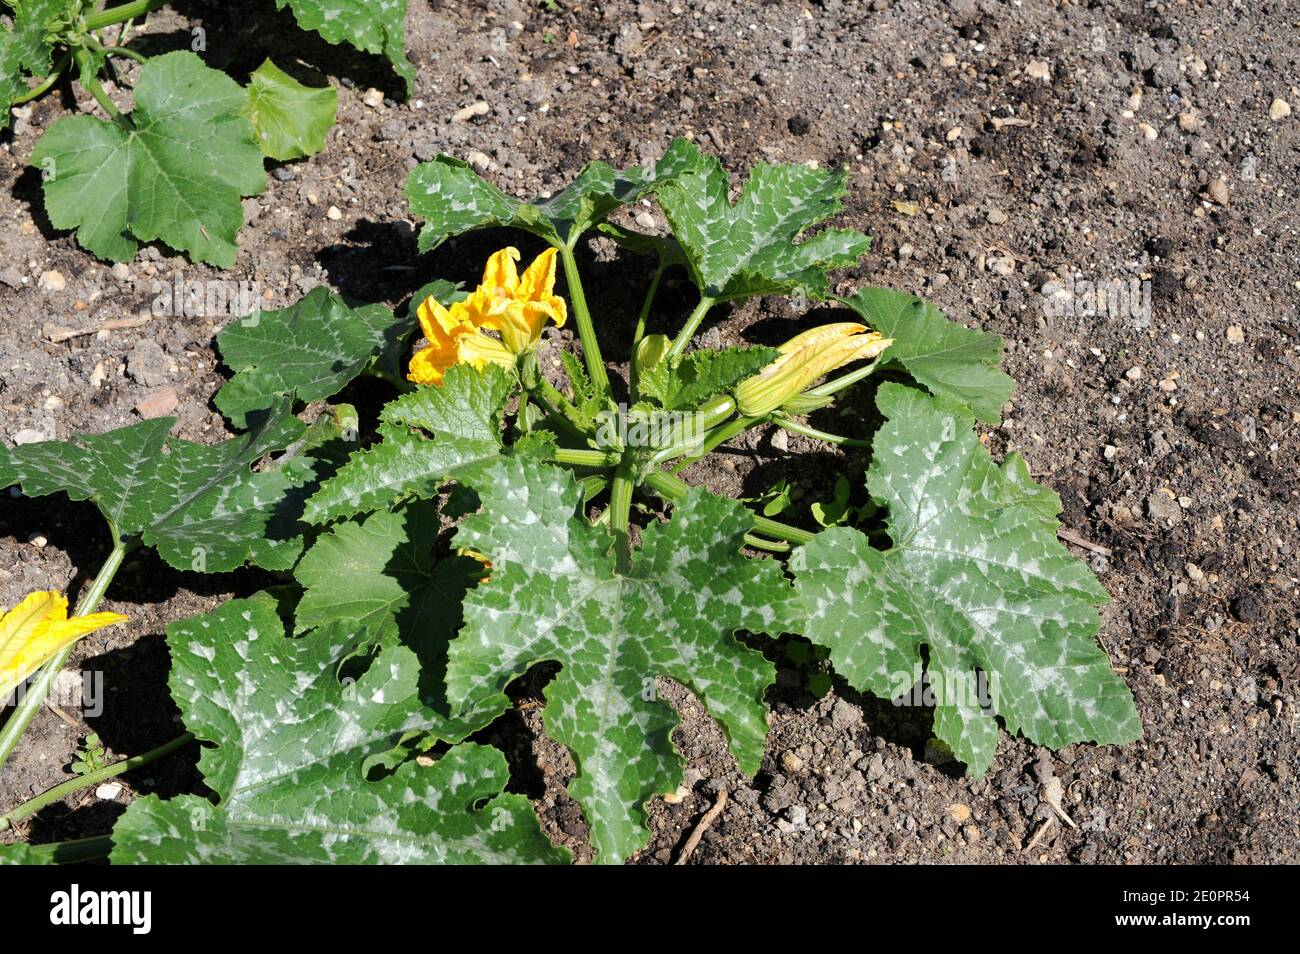 Zucchini (Cucurbita pepo cylindrica) is an annual prostrate plant whith edible fruits. Stock Photo